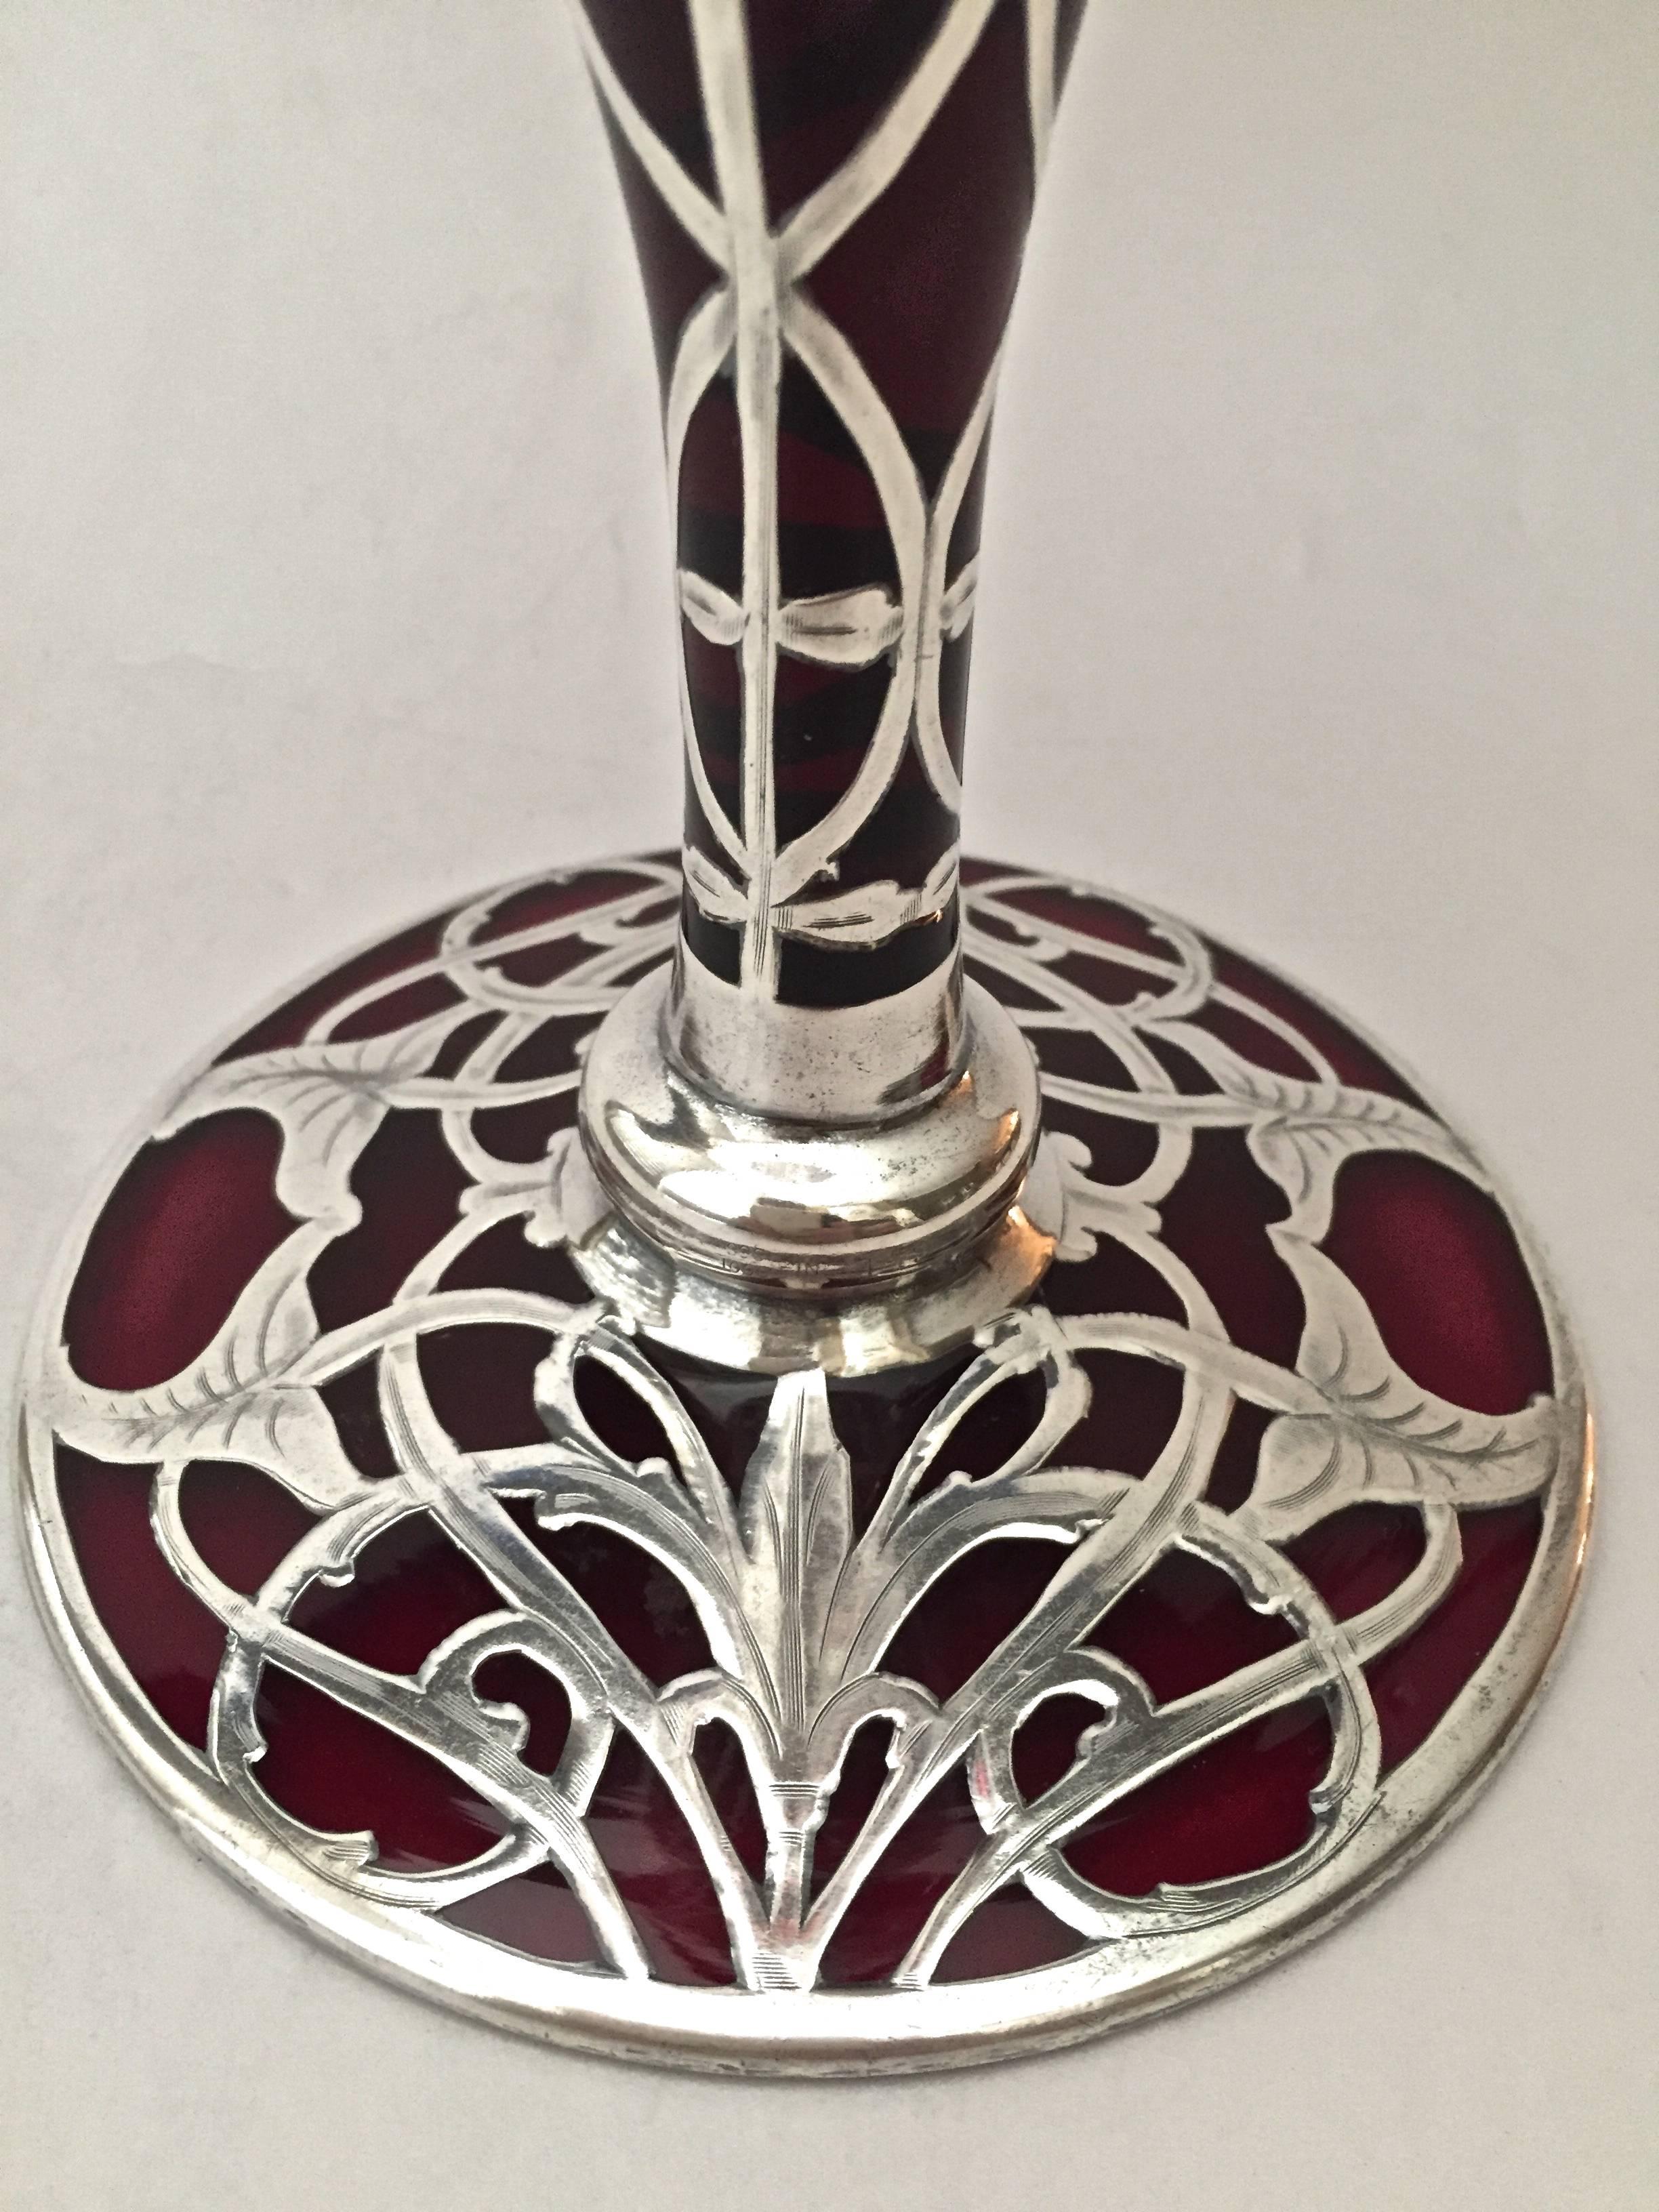 A very large Art Nouveau sterling silver overlay vase with ruby glass, circa 1900 the tapering cylindrical form having an overlay of sterling silver with flowers. Lovely chasing to the flowers and leaves, the style of Art Nouveau is present here.